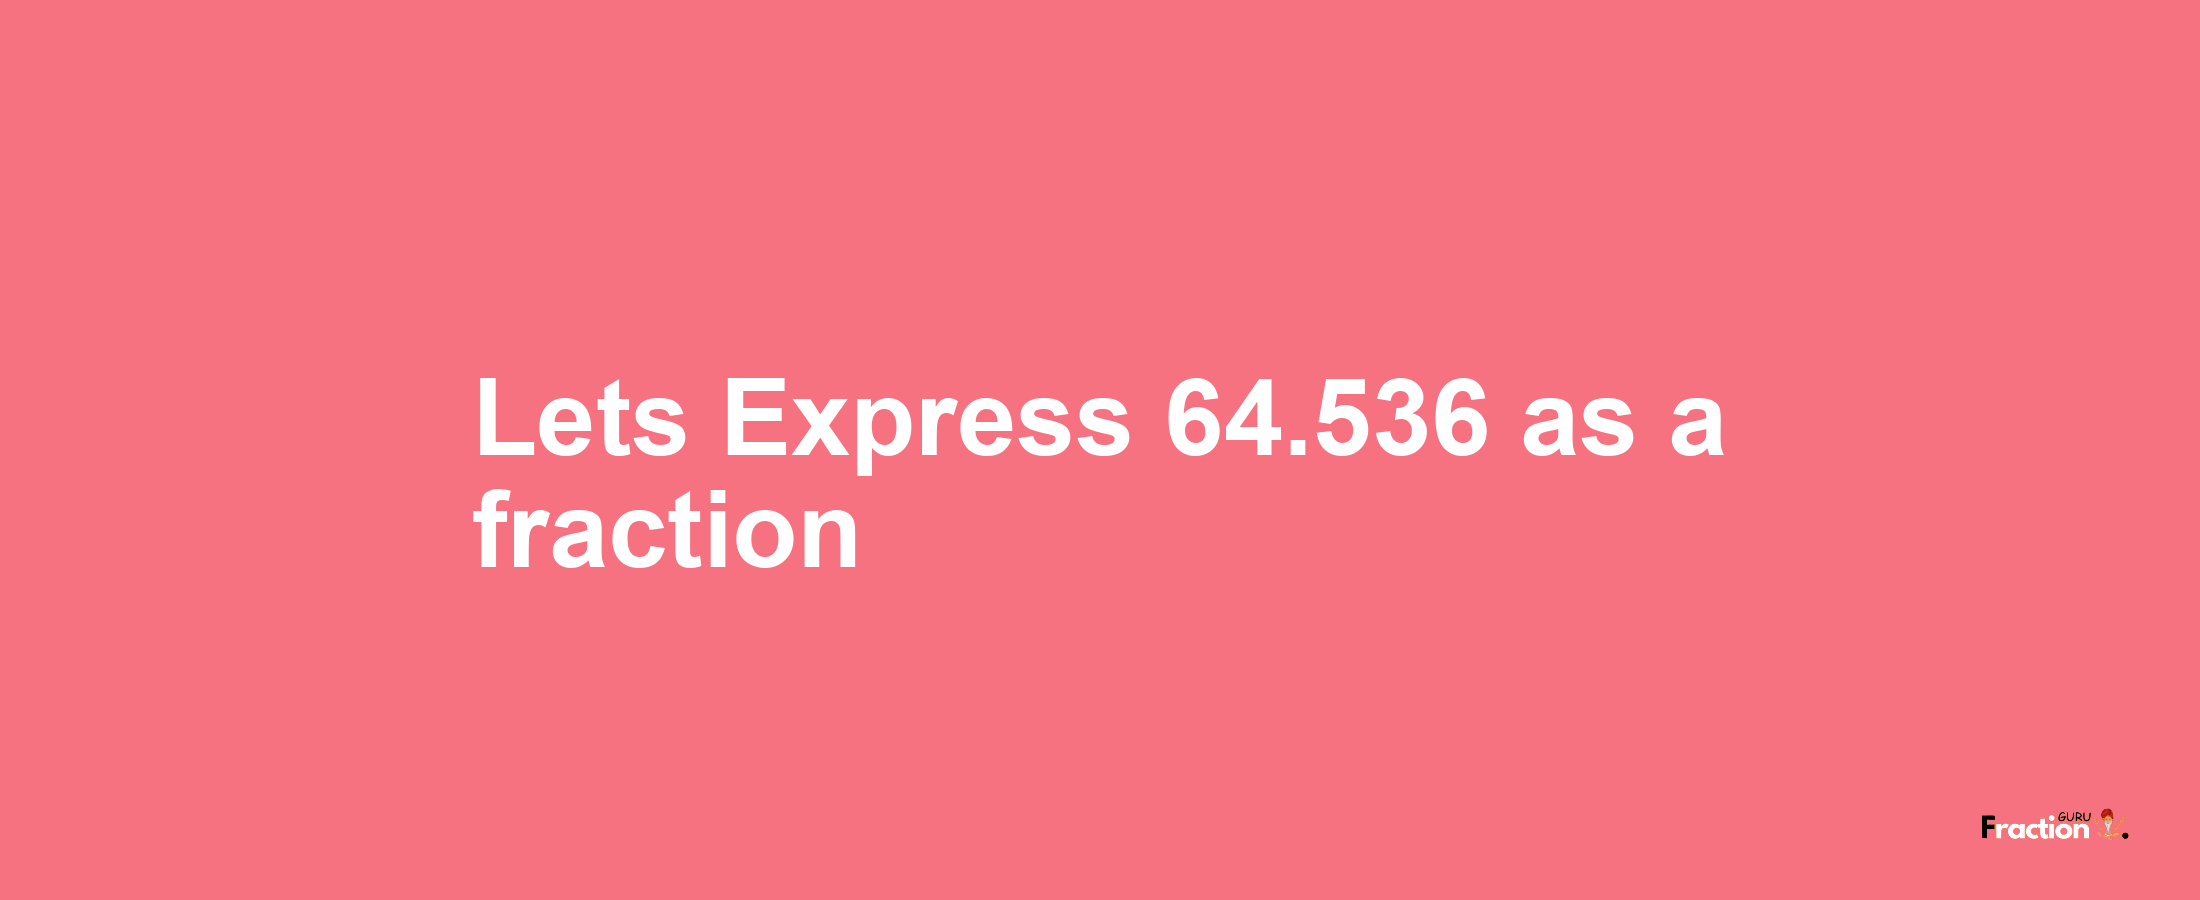 Lets Express 64.536 as afraction